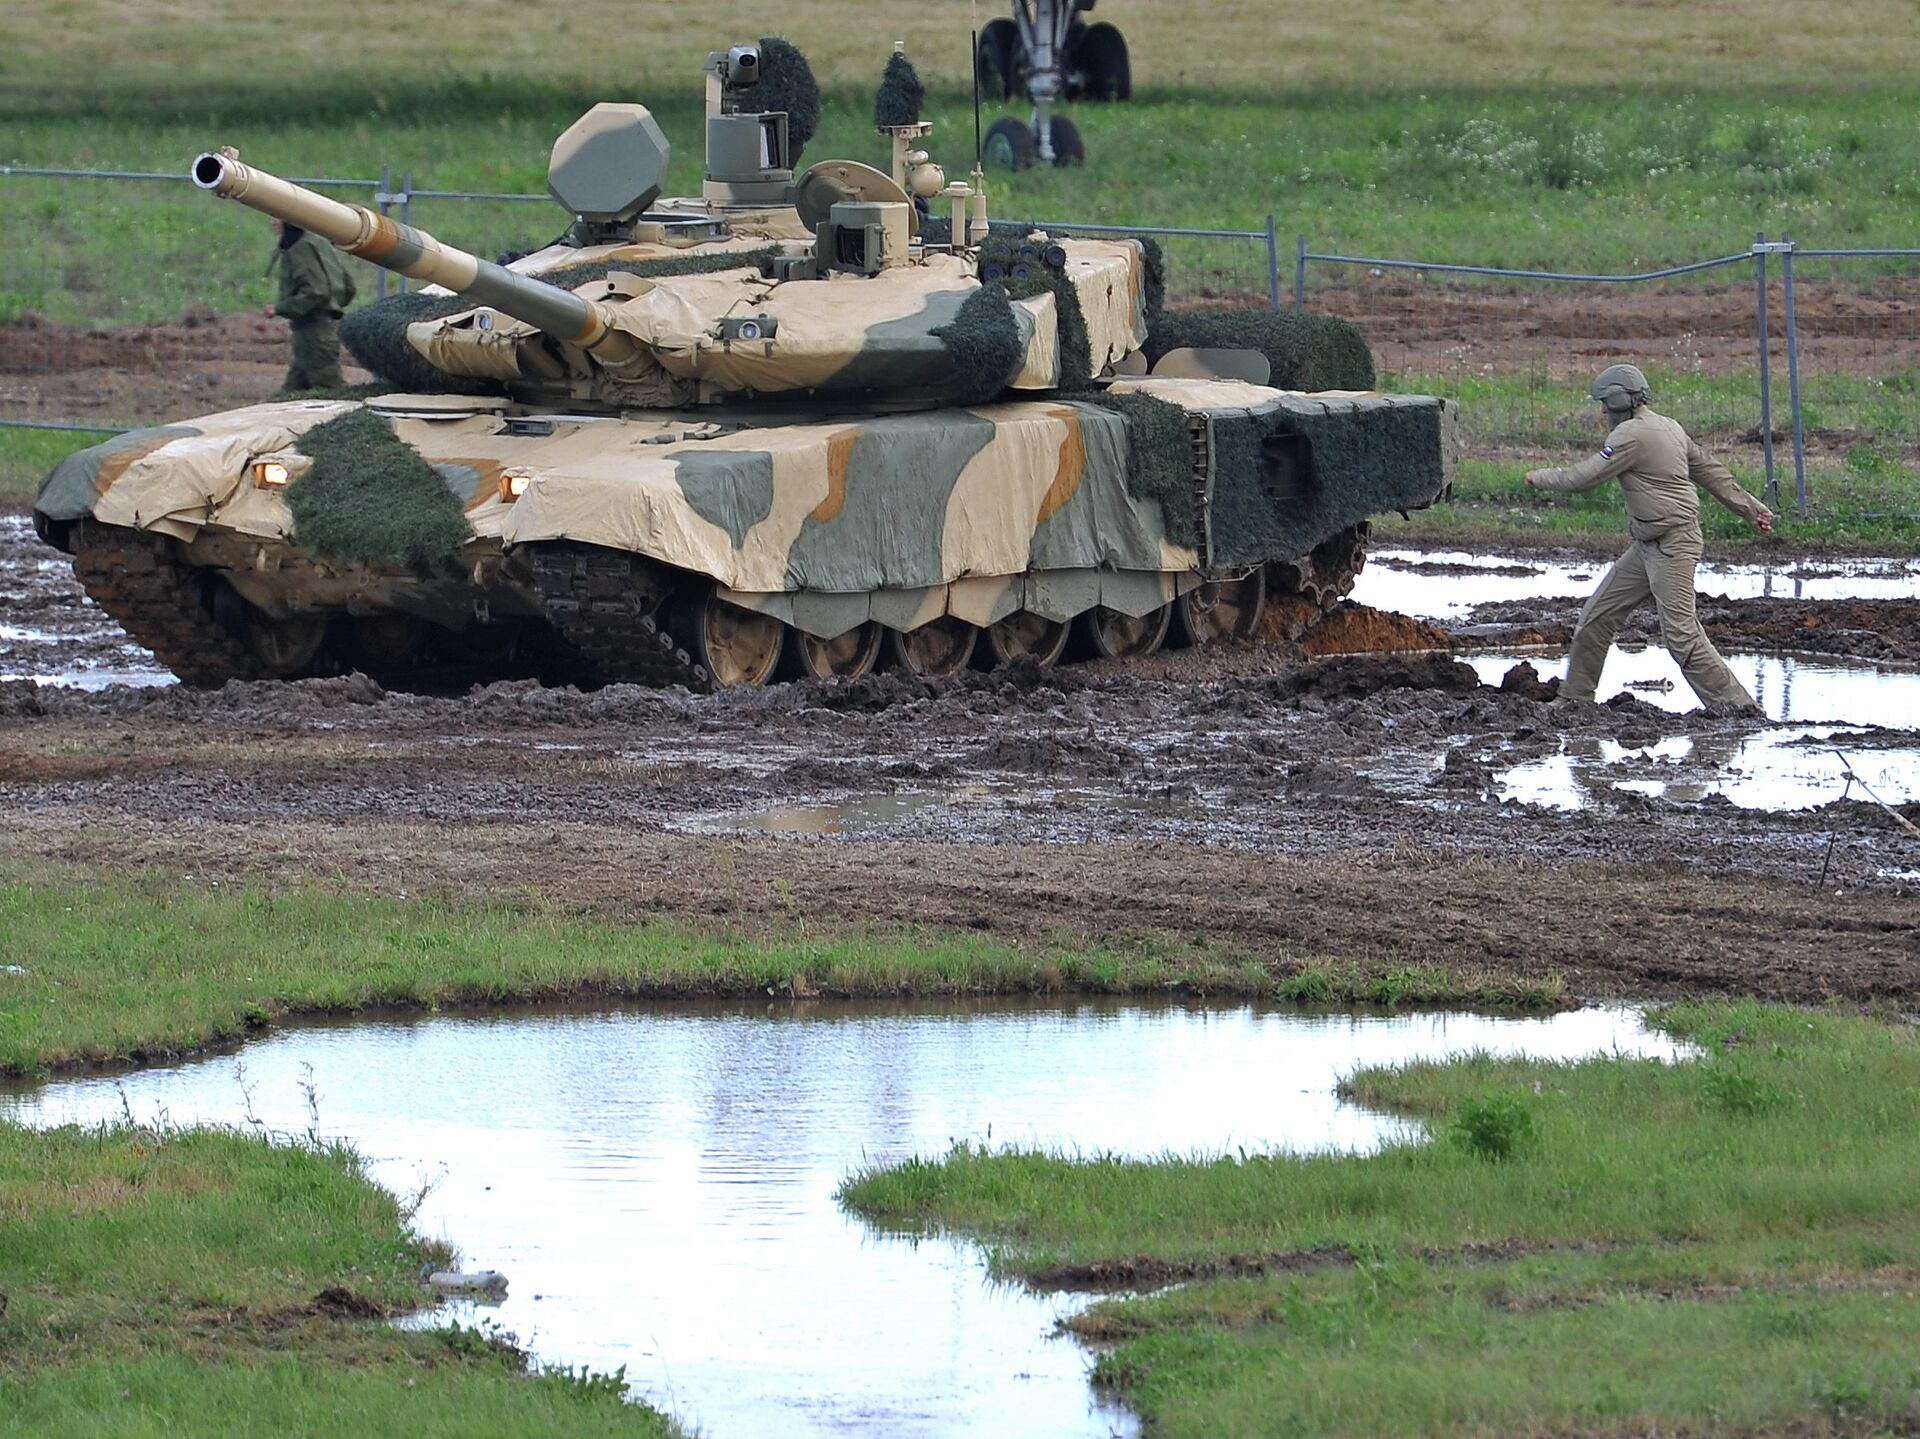 Protective camouflage 'cape' developed for Russian tanks - Defence Connect